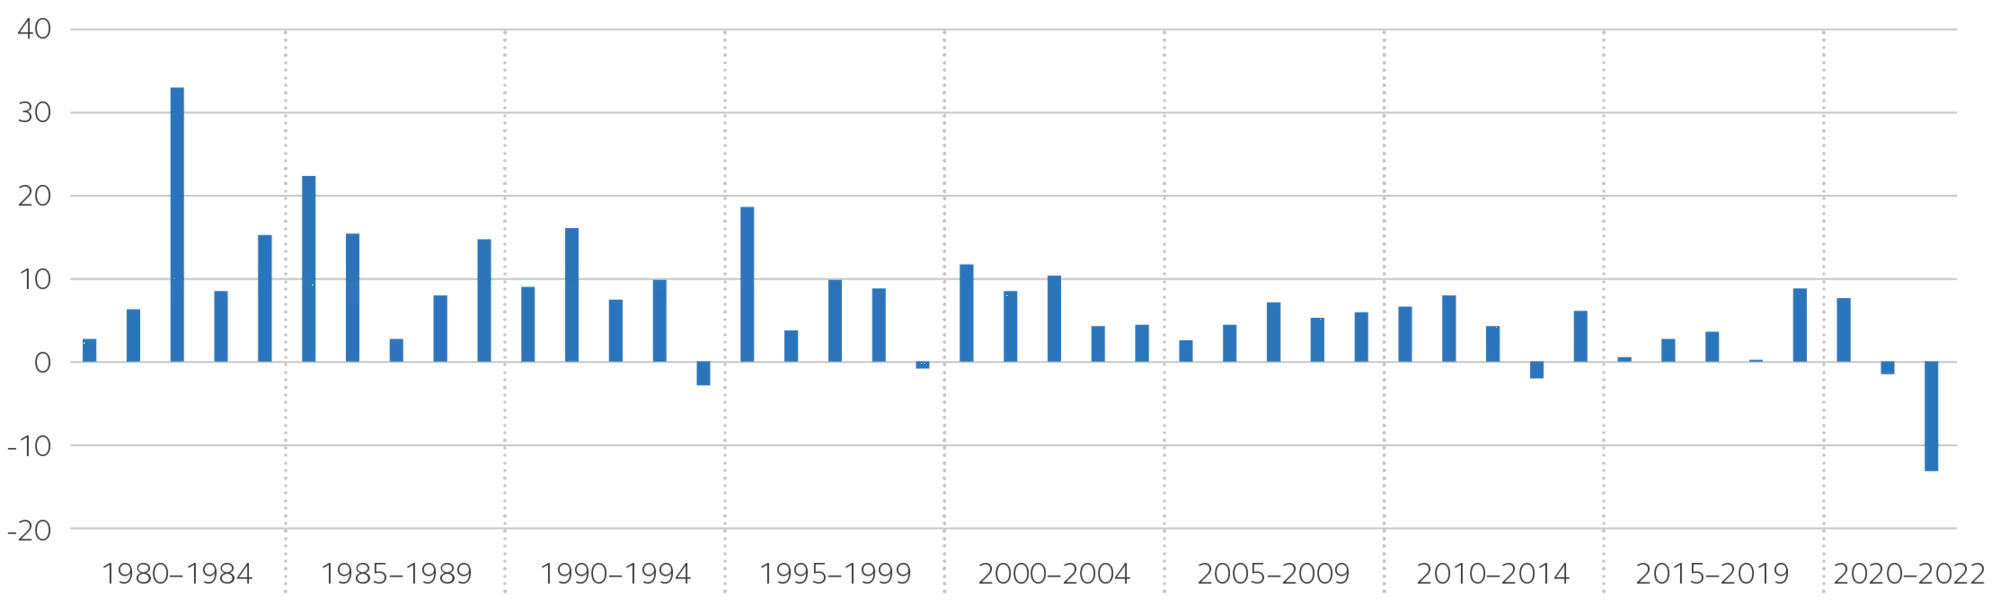 Bar graph of U.S. aggregate bond index yearly returns from 1980-2022